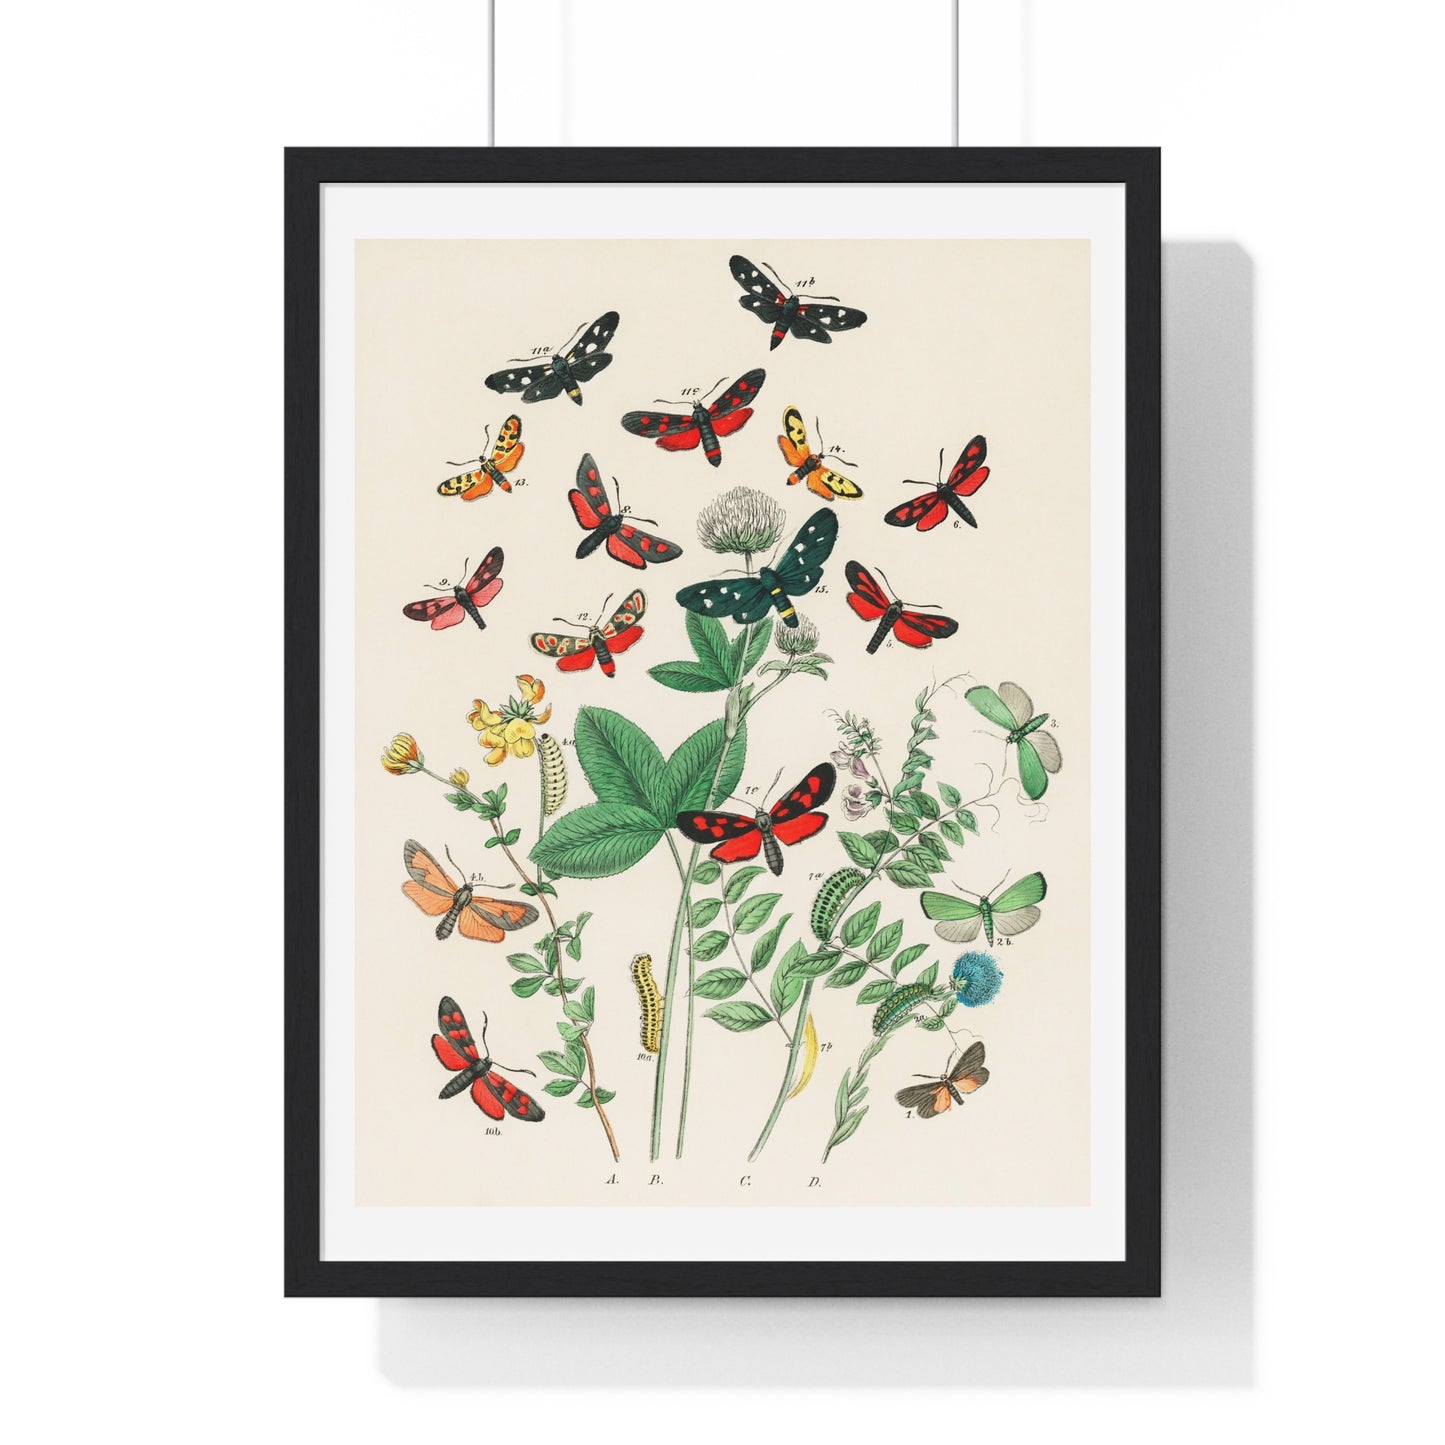 Illustrations from 'European Butterflies and Moths' by William Forsell Kirby (1882) from the Original, Framed Print